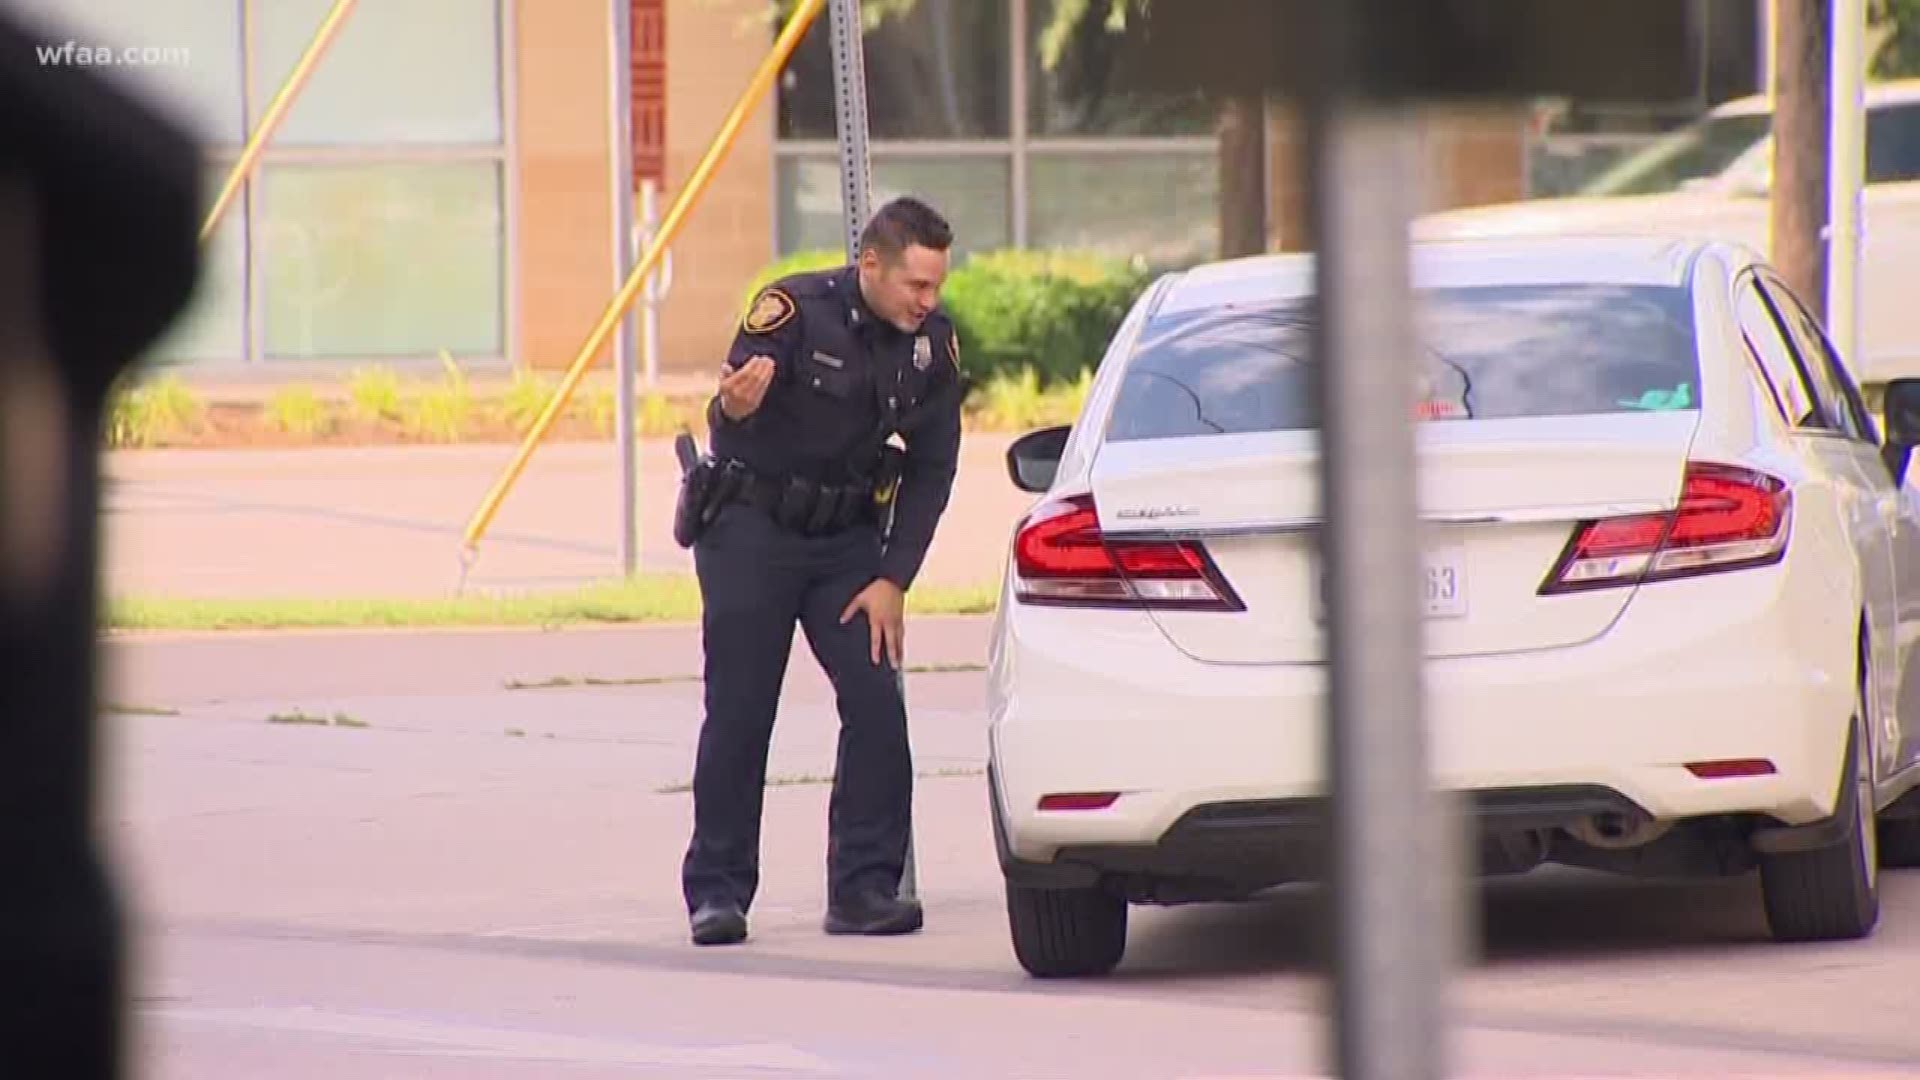 Police in Fort Worth are working to stop wrong-way drivers in West 7th area.